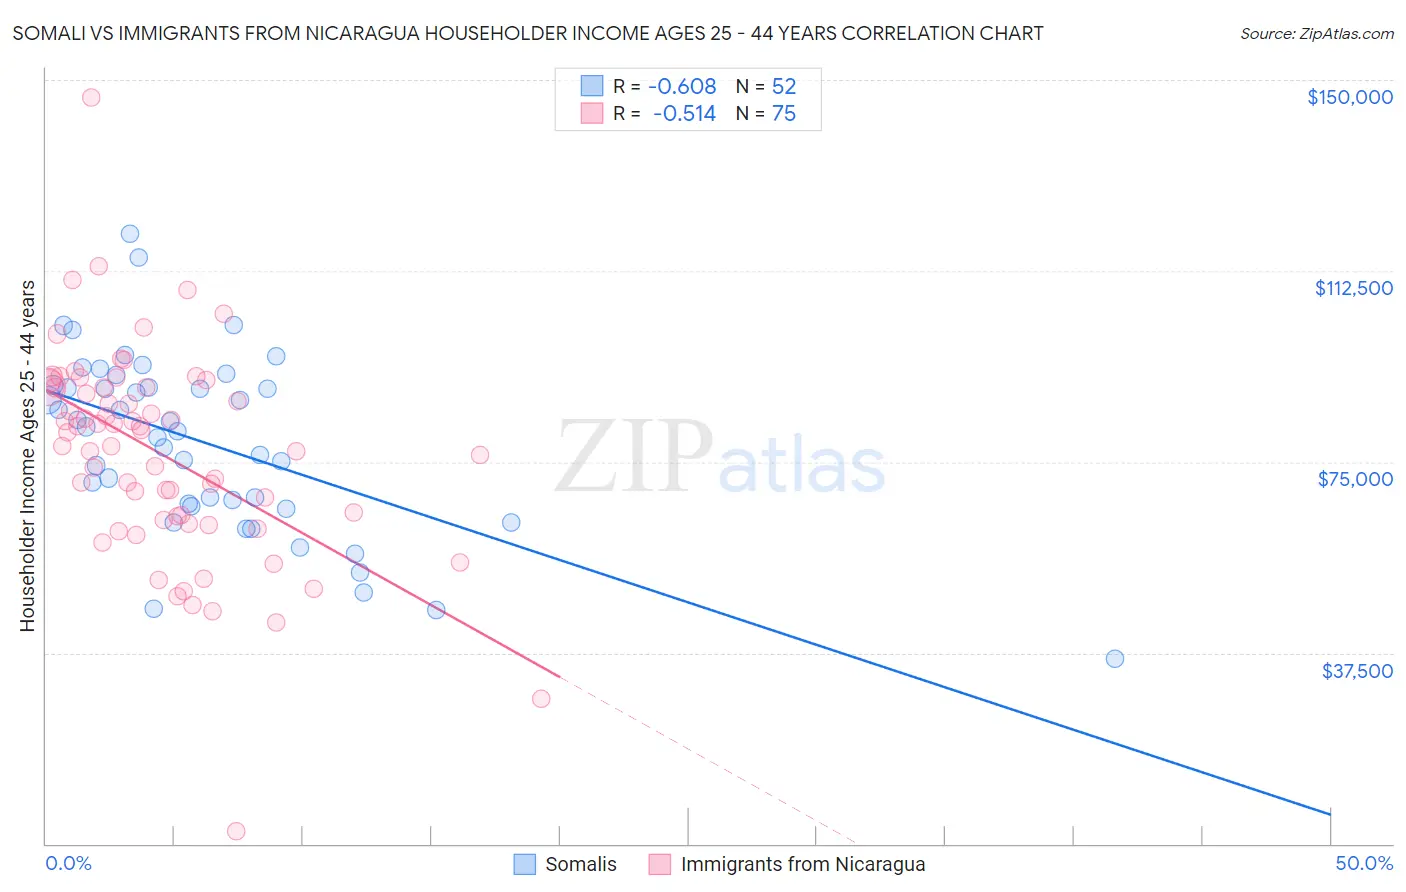 Somali vs Immigrants from Nicaragua Householder Income Ages 25 - 44 years